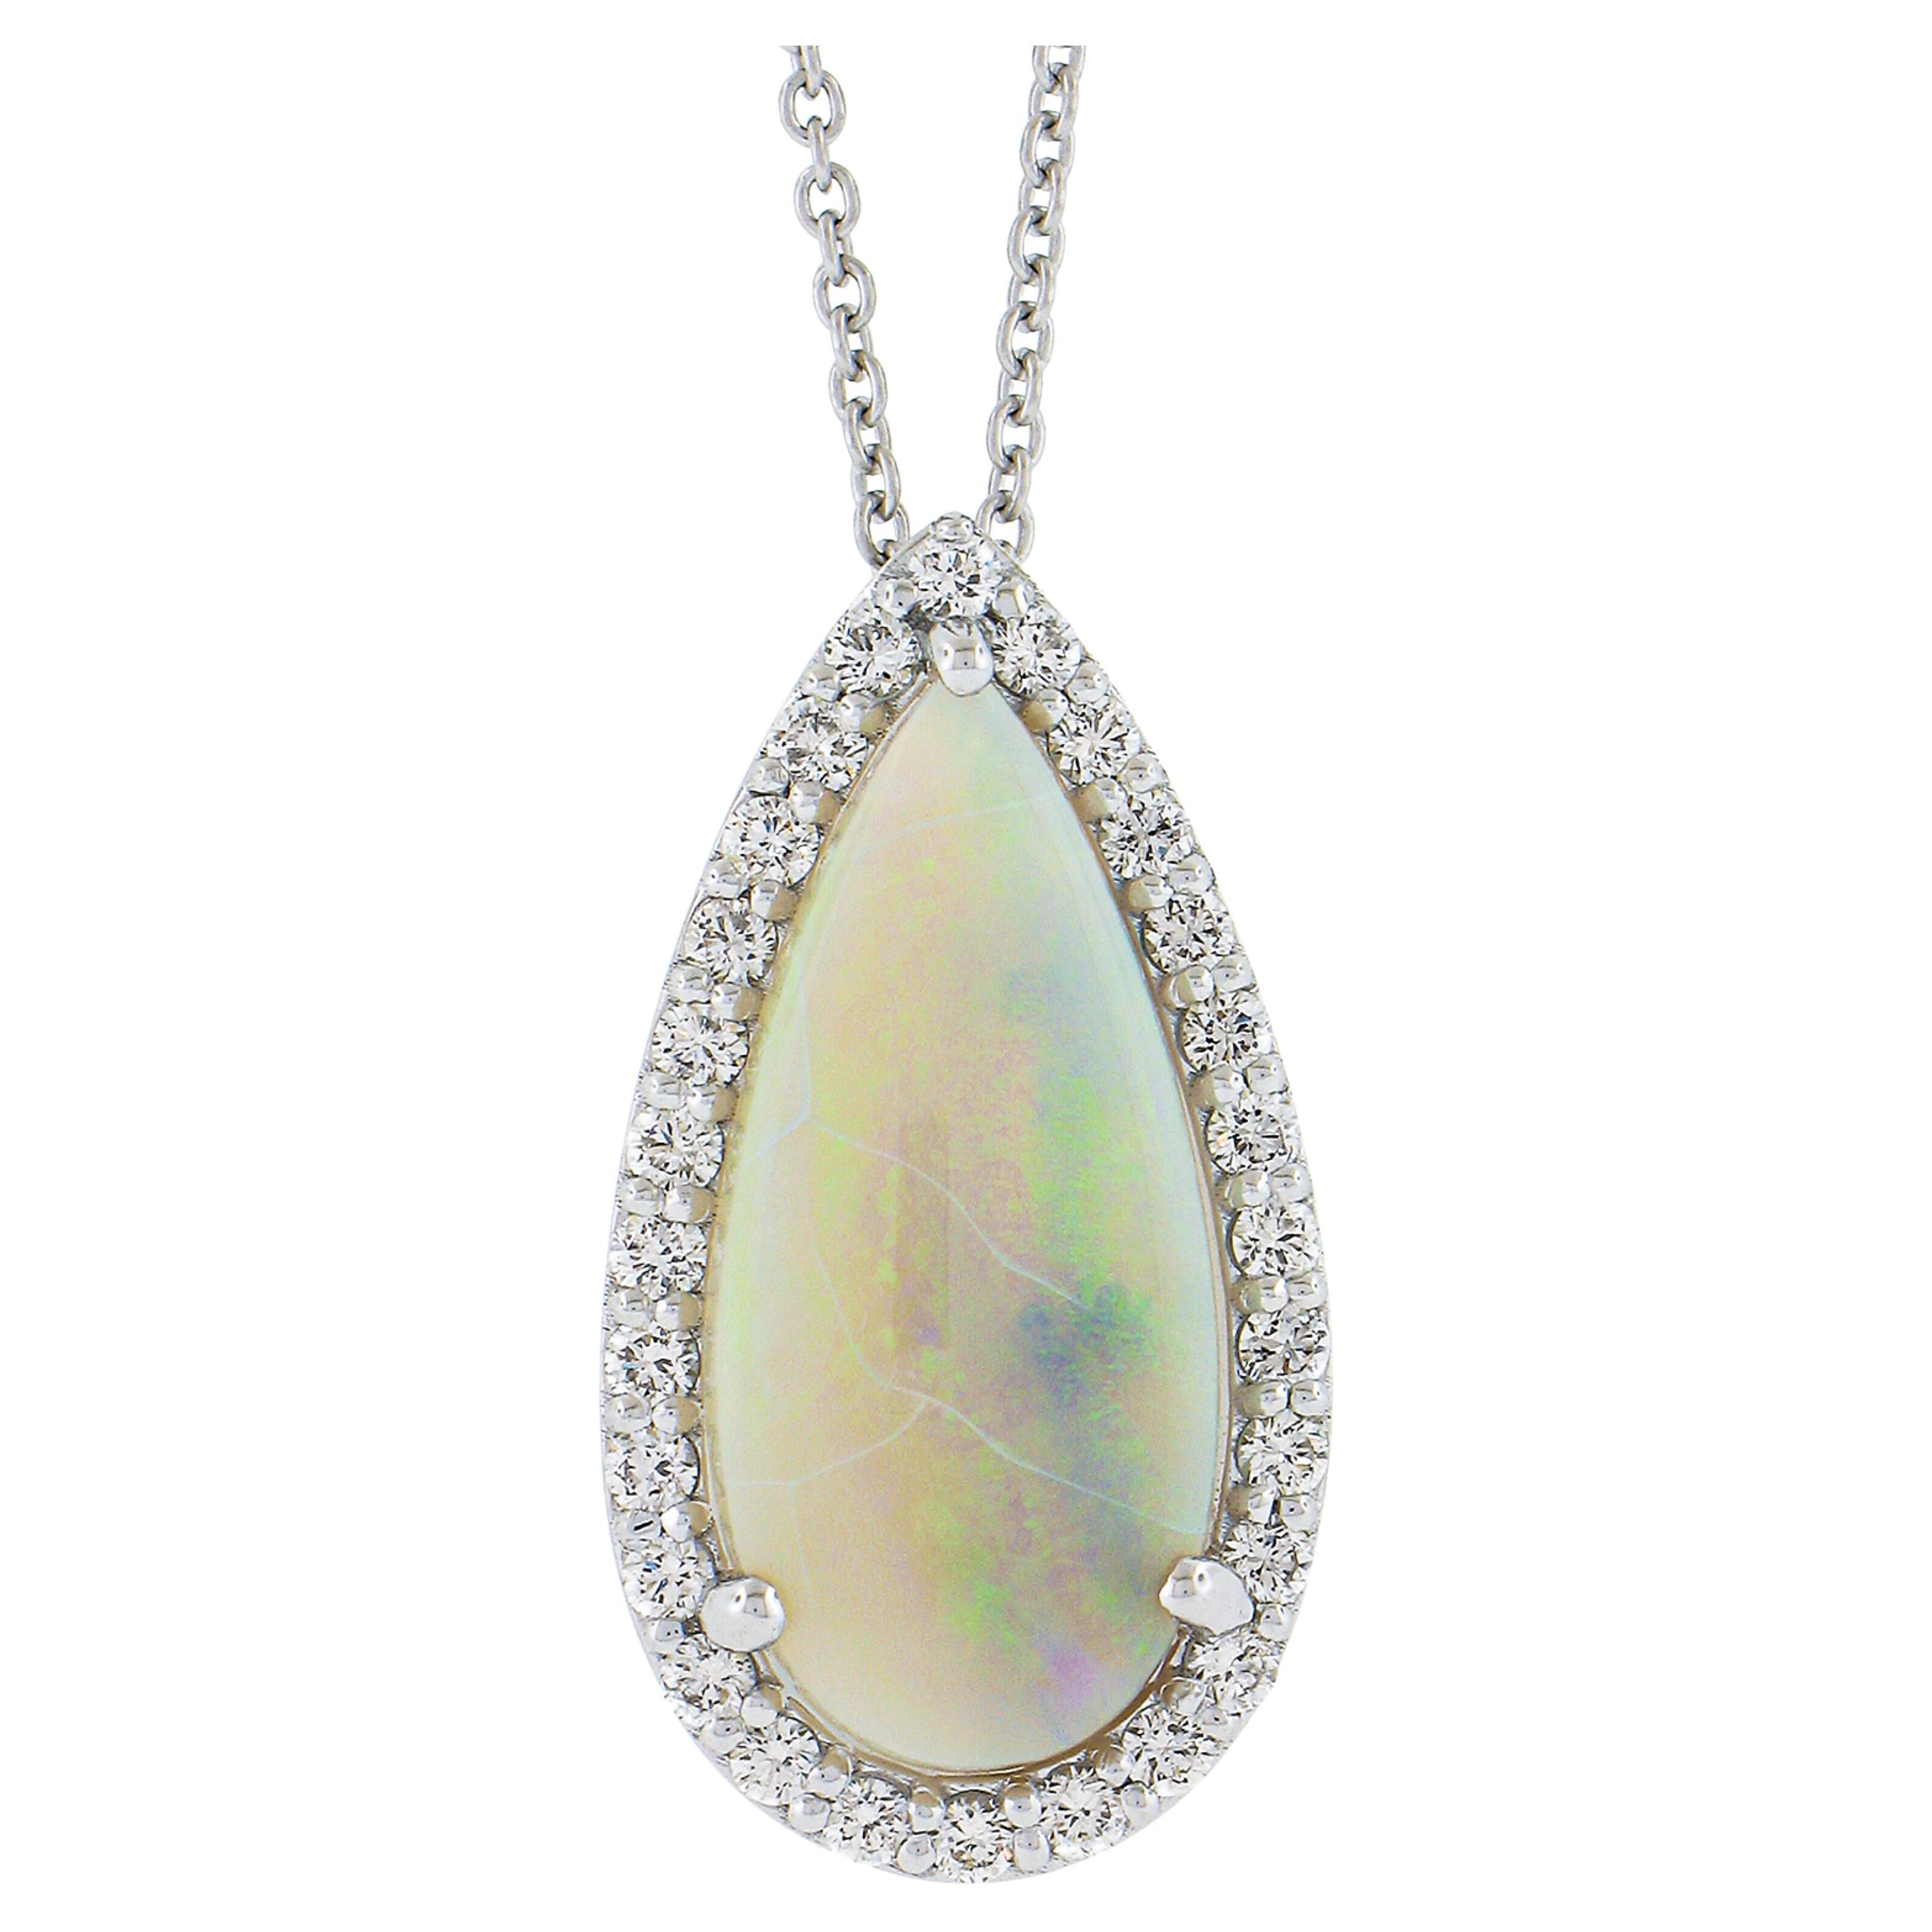 New 14K White Gold 4.7ctw Pear Opal & Diamond Halo Pendant 16" or 18" Chain Link For Sale